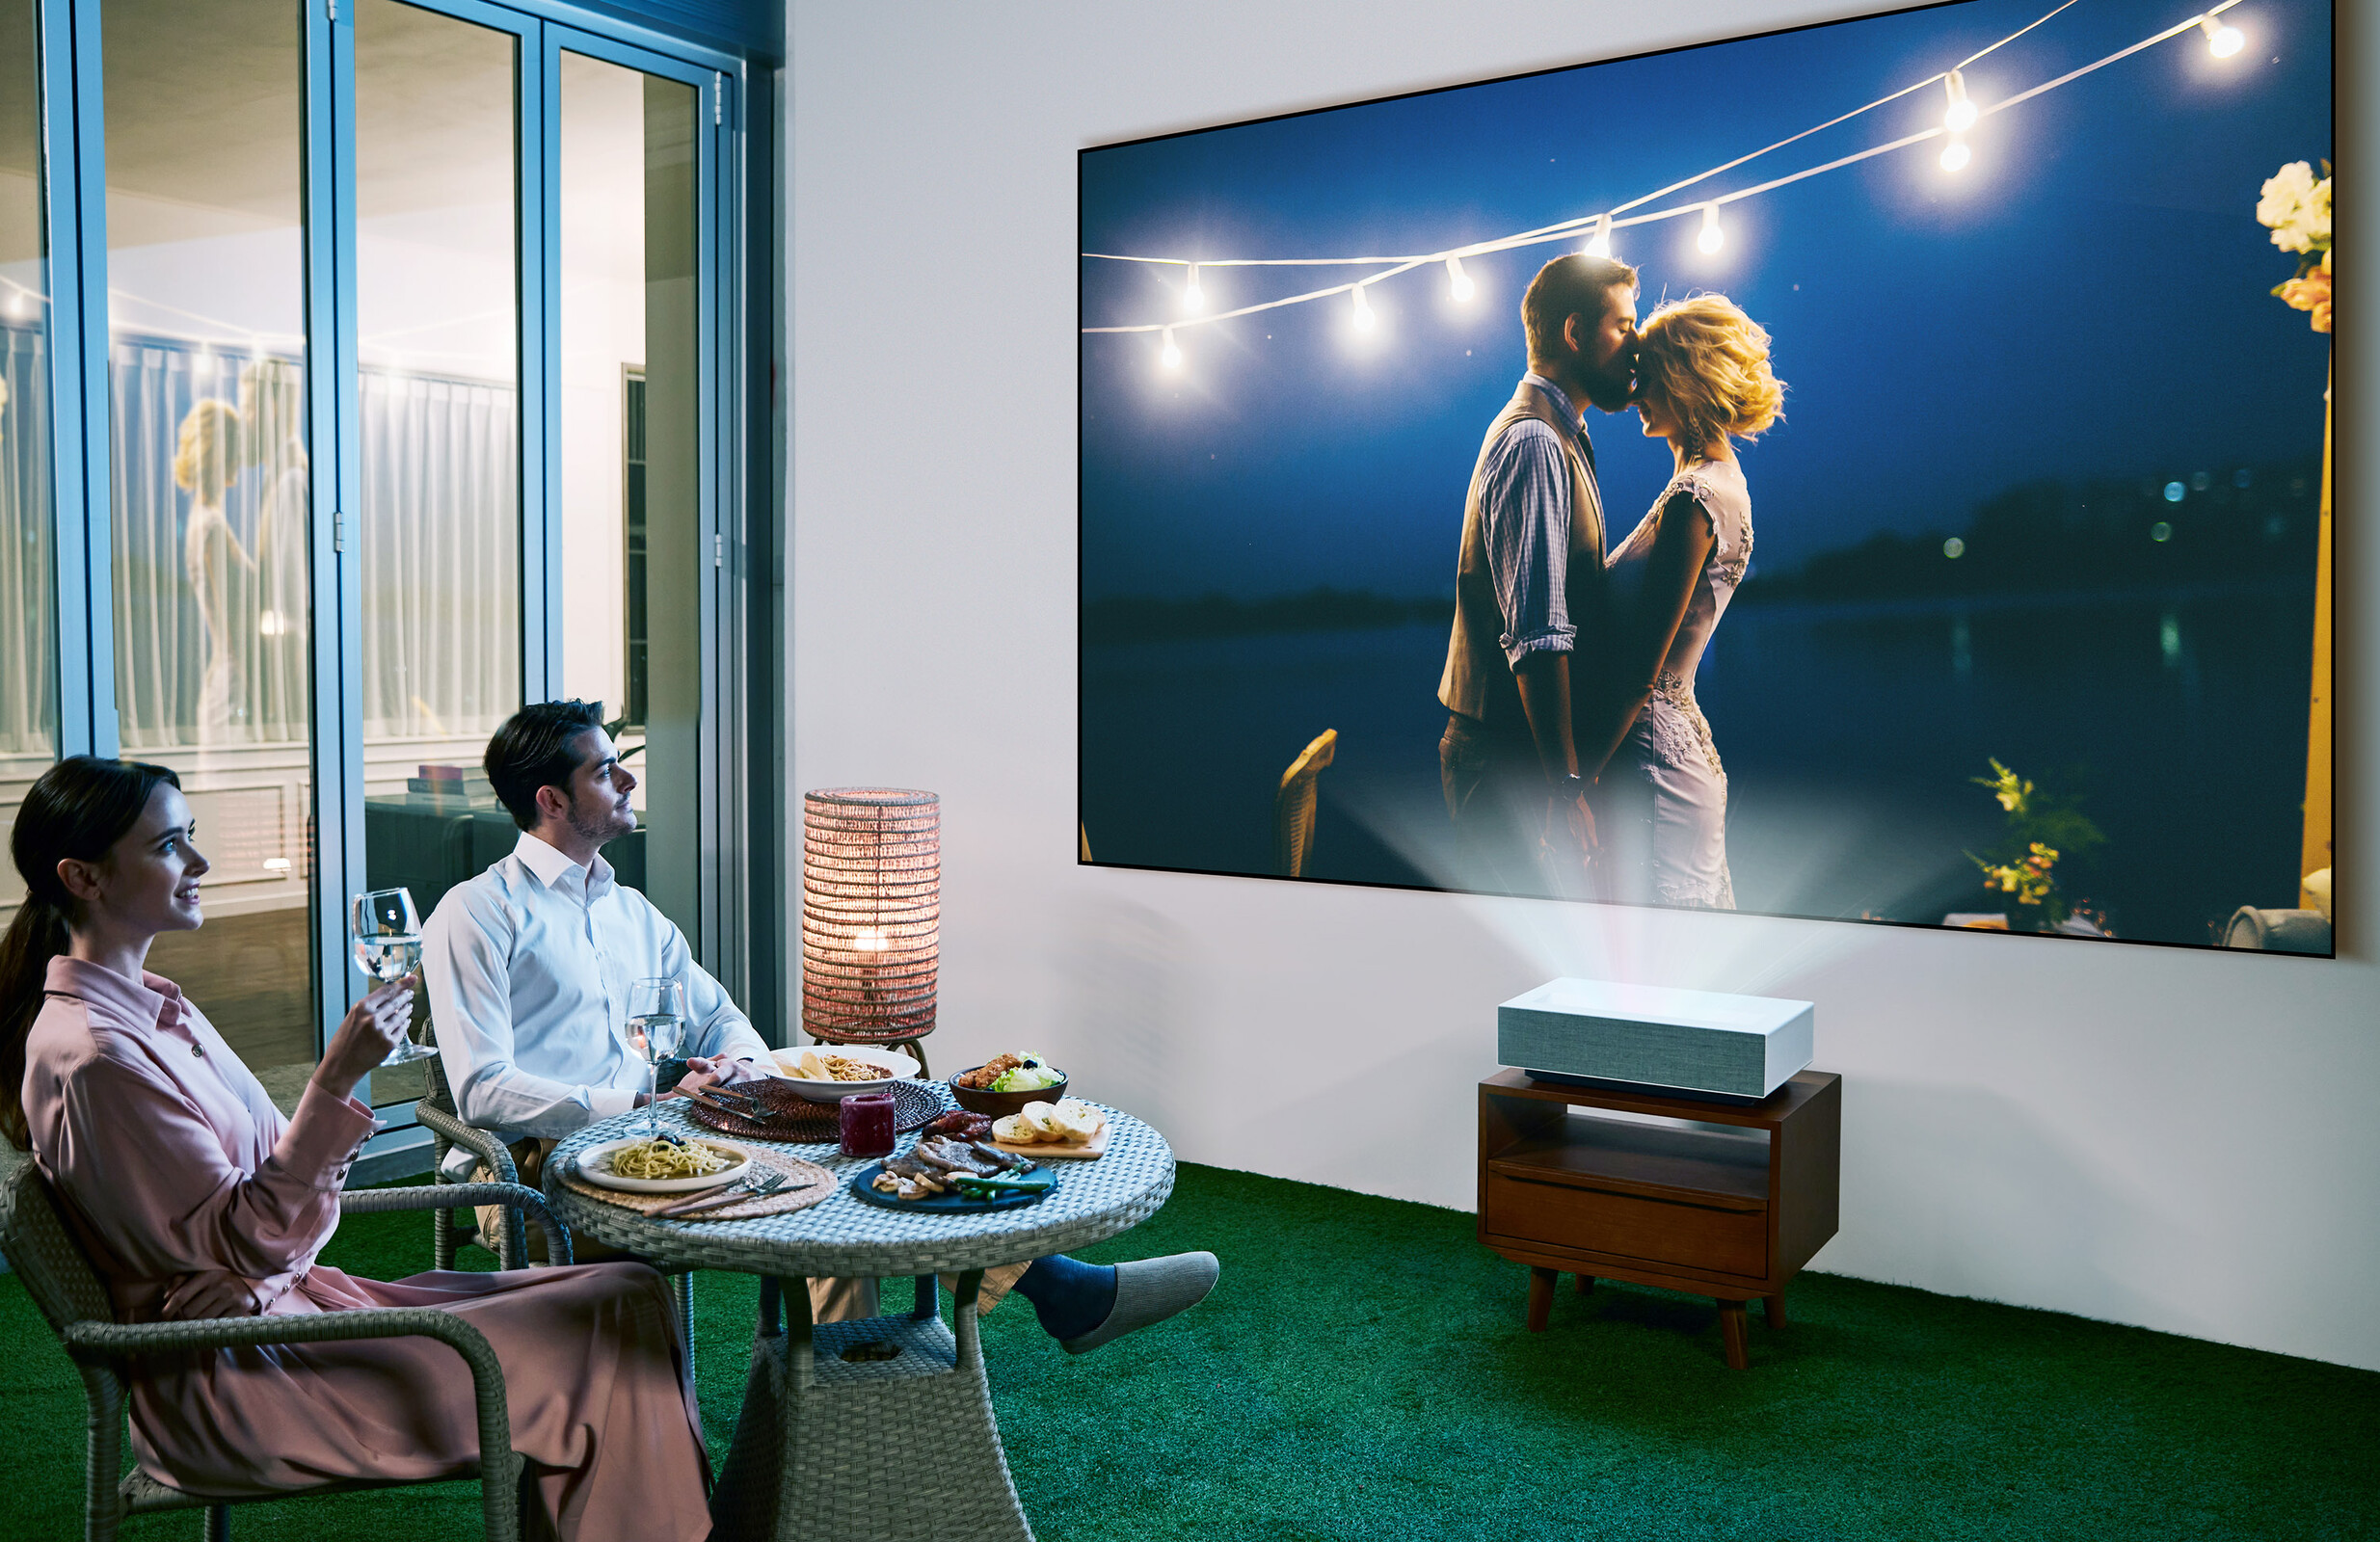 LG CineBeam HU715QW 4K laser ultrashortthrow projector launches with